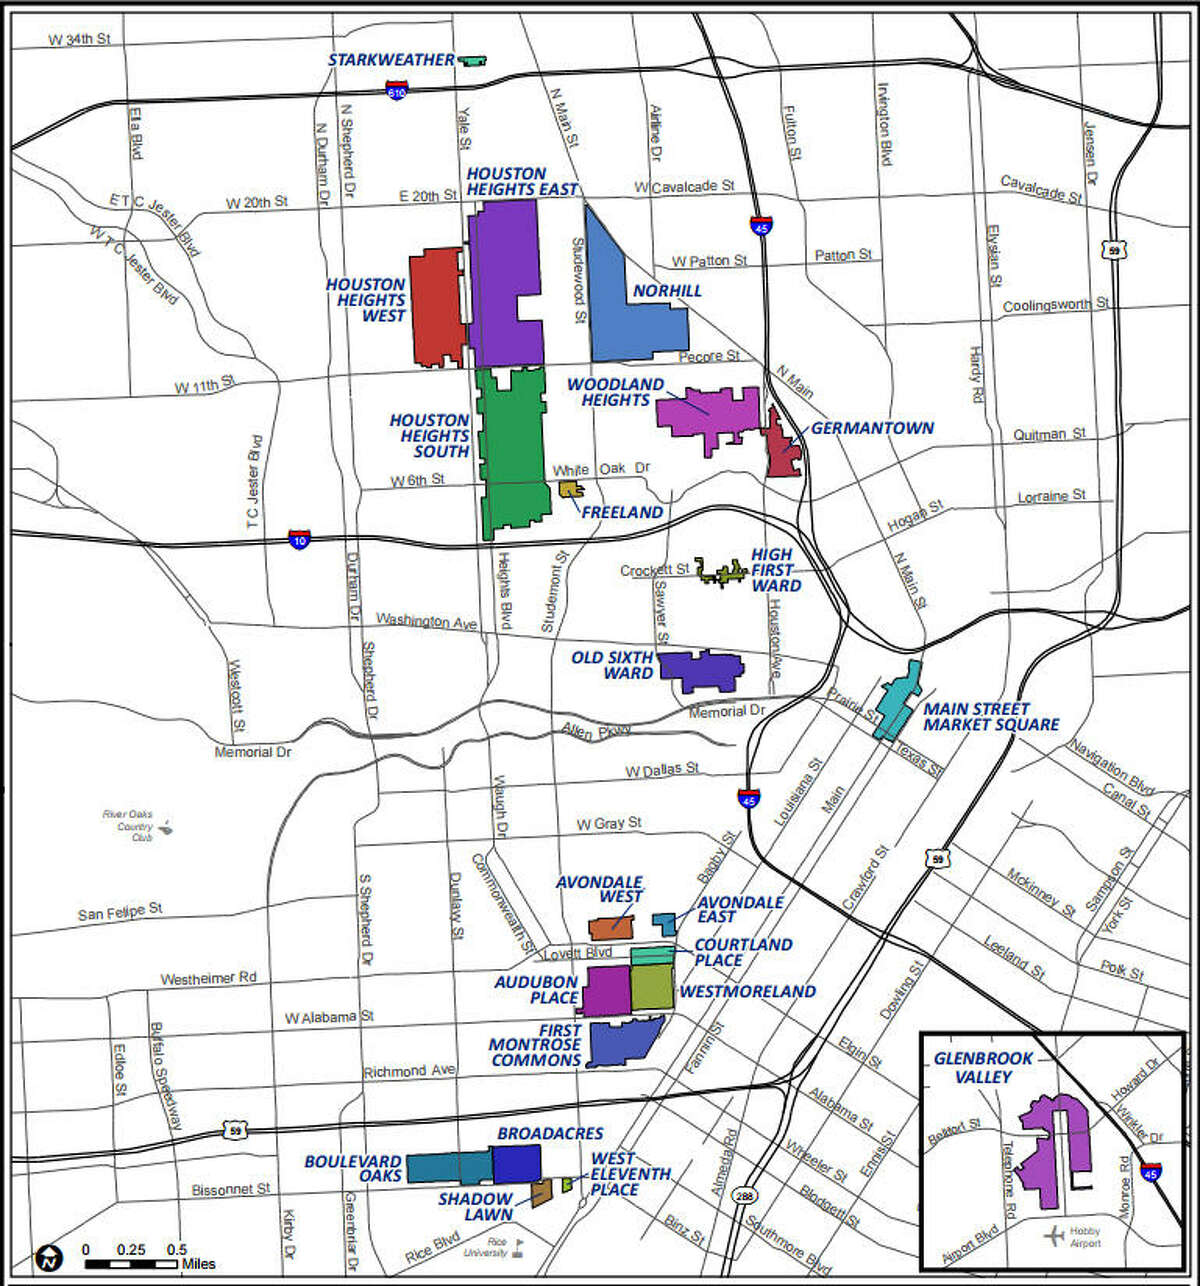 The city of Houston Historic Districts.